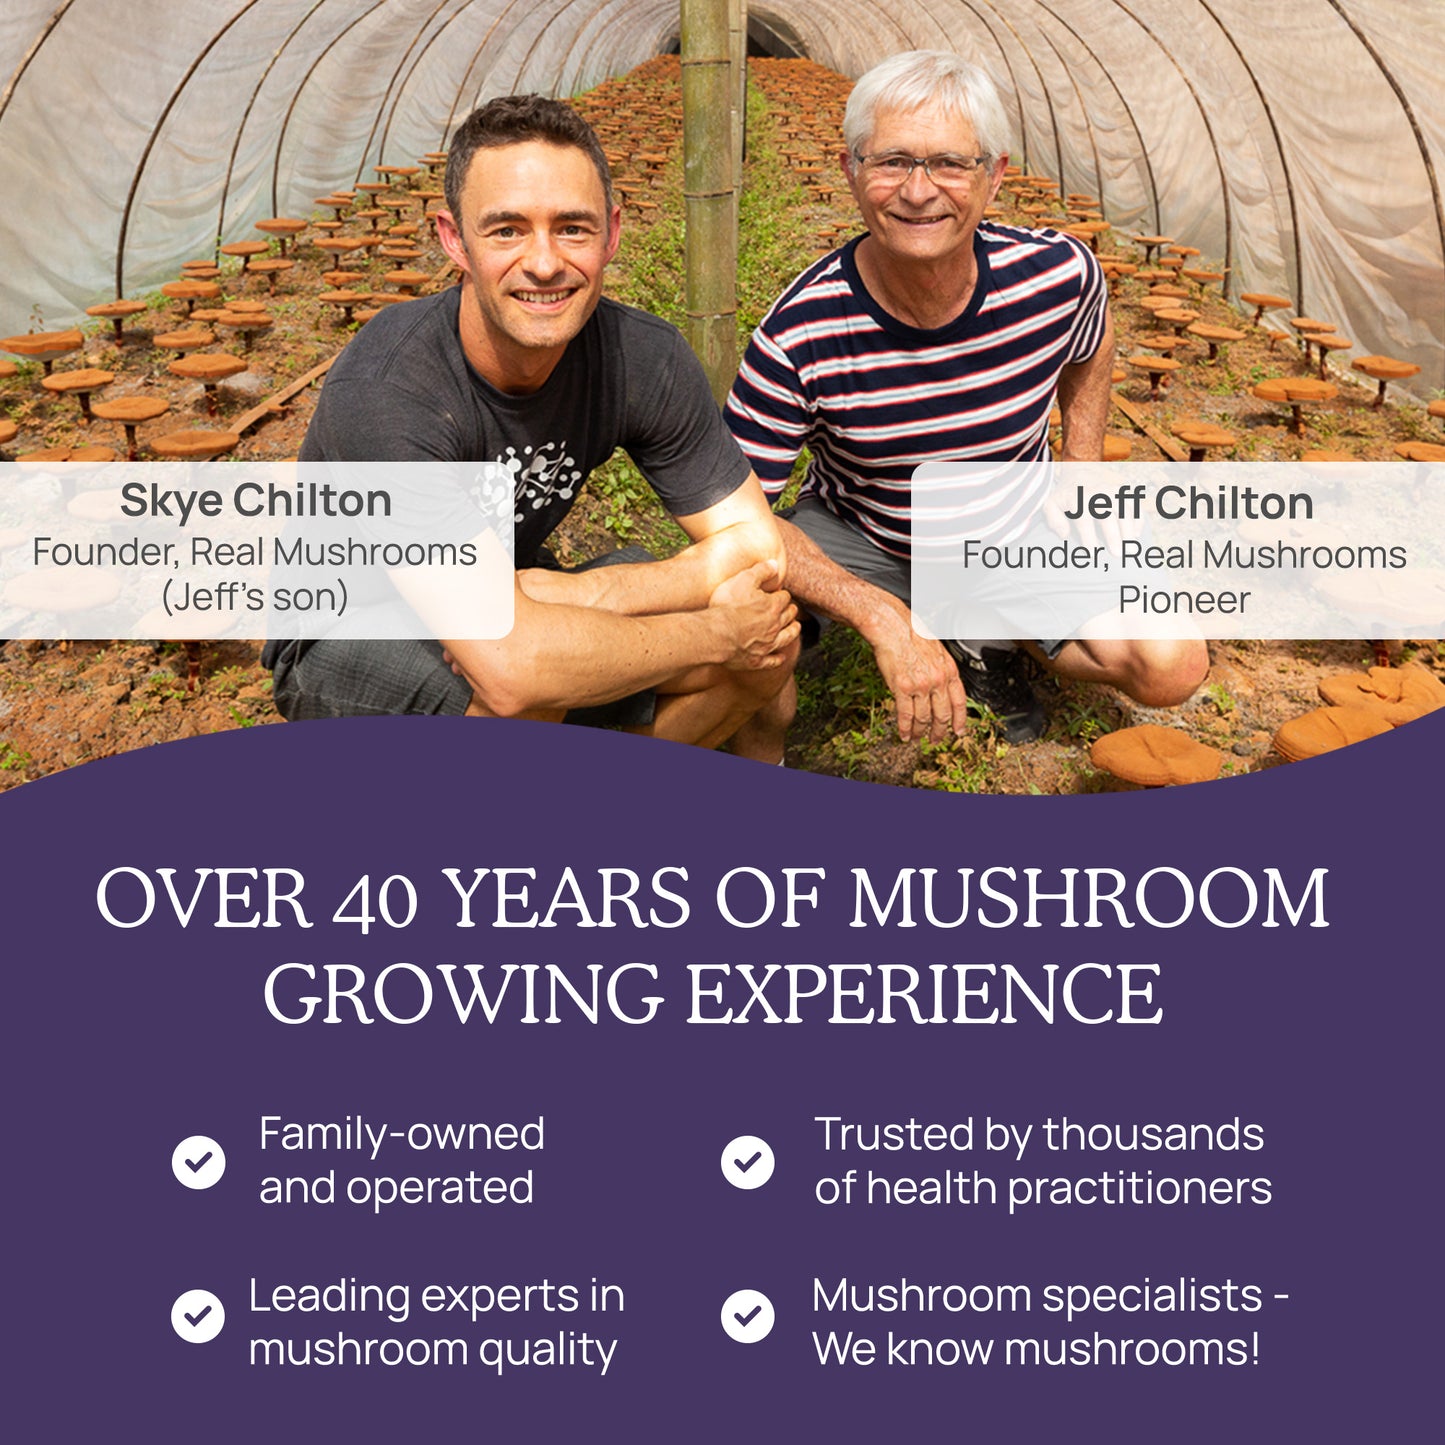 Two men smiling inside a Mushroom D2Z growing facility, with text highlighting their expertise and experience in the organic extracts from Reishi and Chaga mushrooms, over 40 years of growing experience, and promoting their family